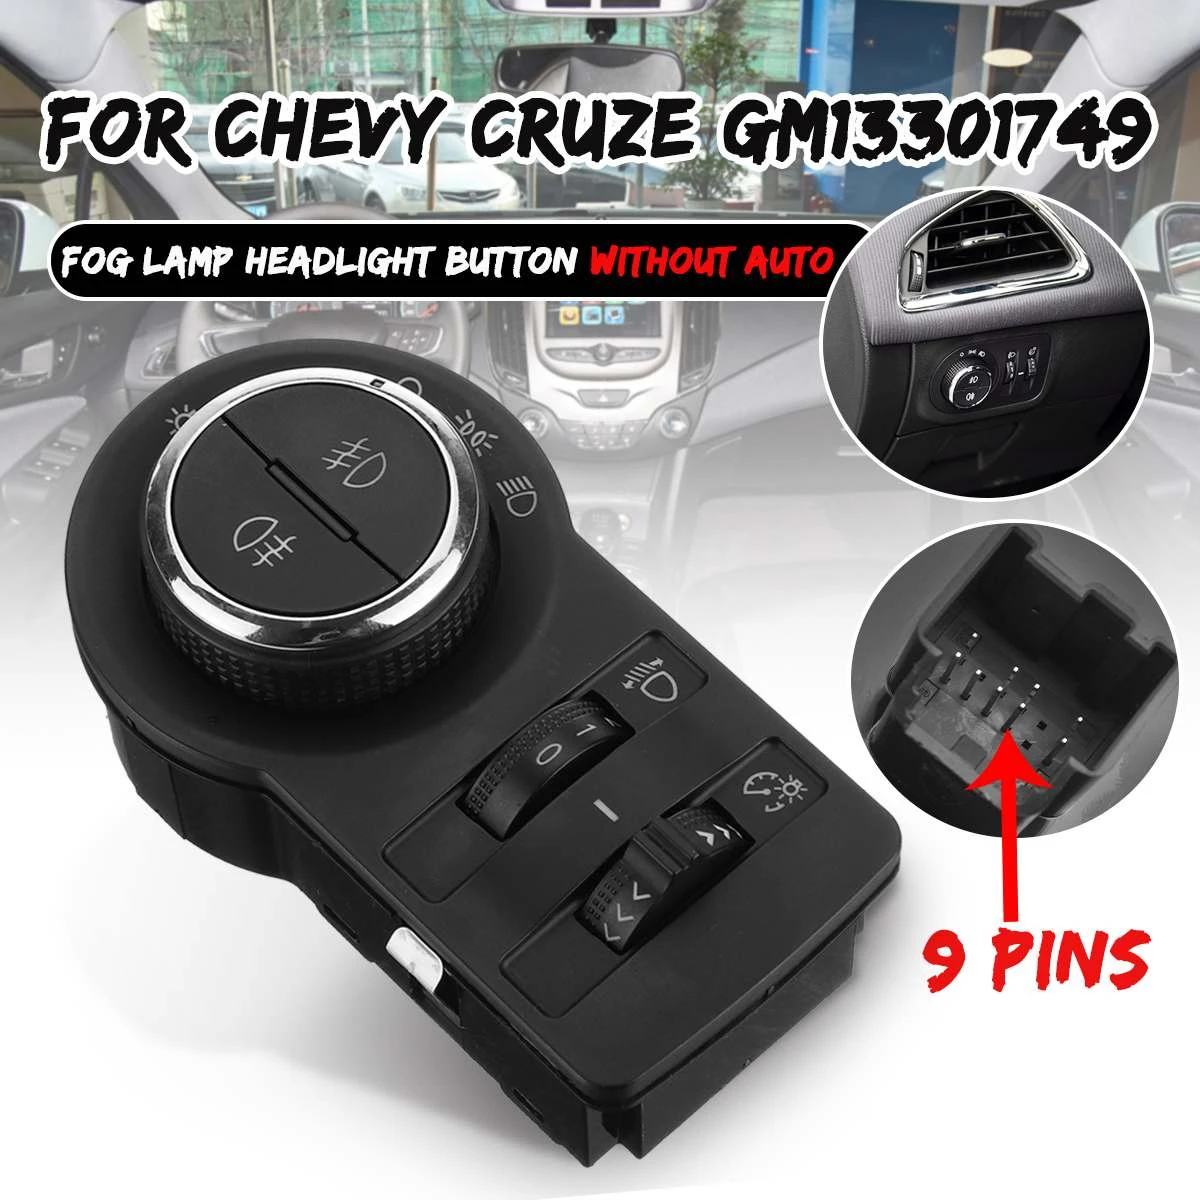 GM13301749 Car Fog Lamp Headlight Switch Button Without AUTO for Chevrolet Cruze J300 1.4 1.6 1.7 Chevy